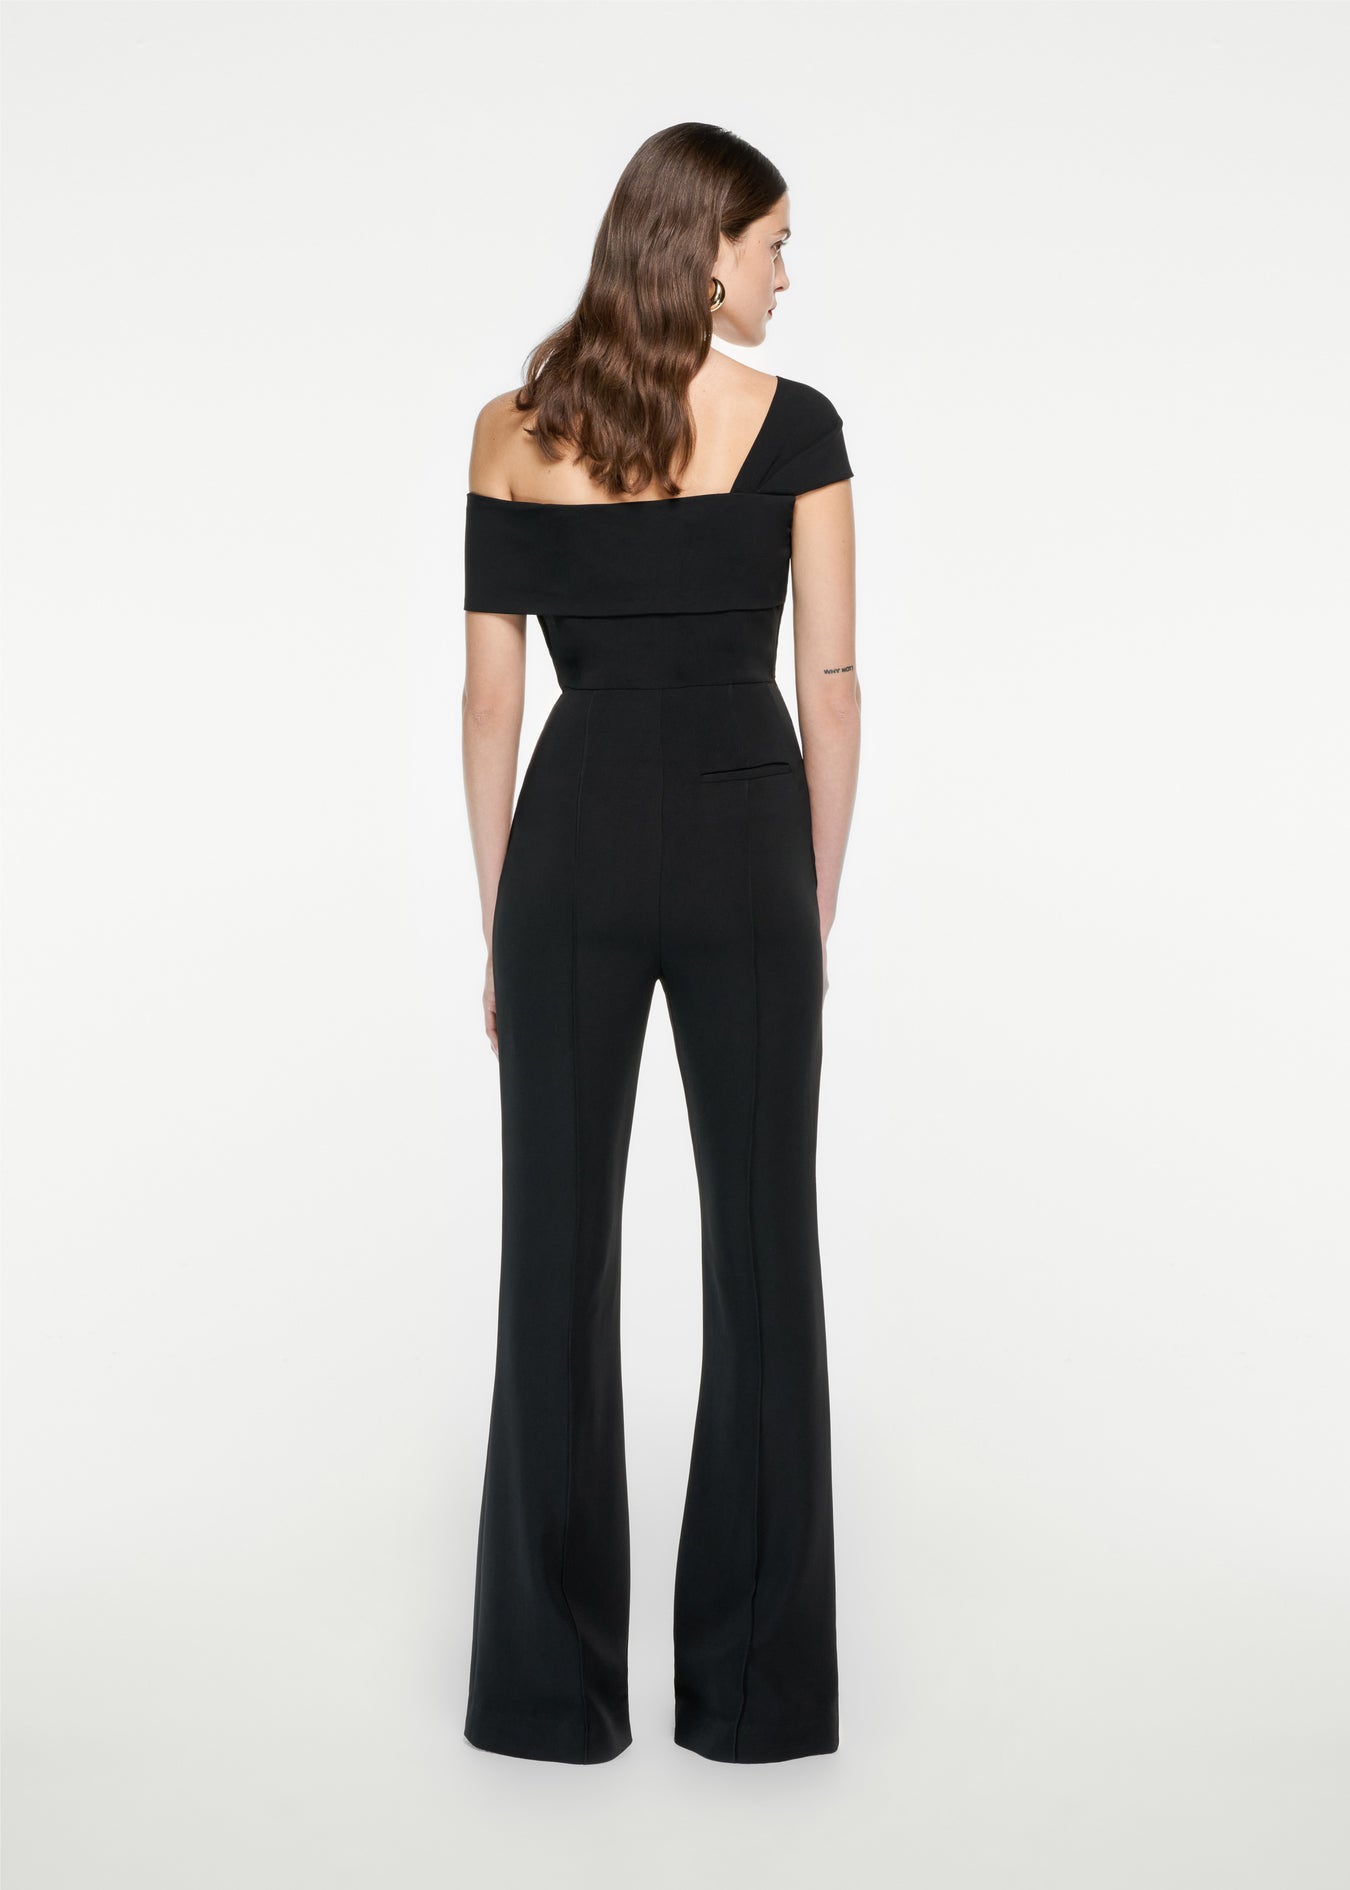 The back of a woman wearing the Asymmetric Stretch Cady Jumpsuit in Black